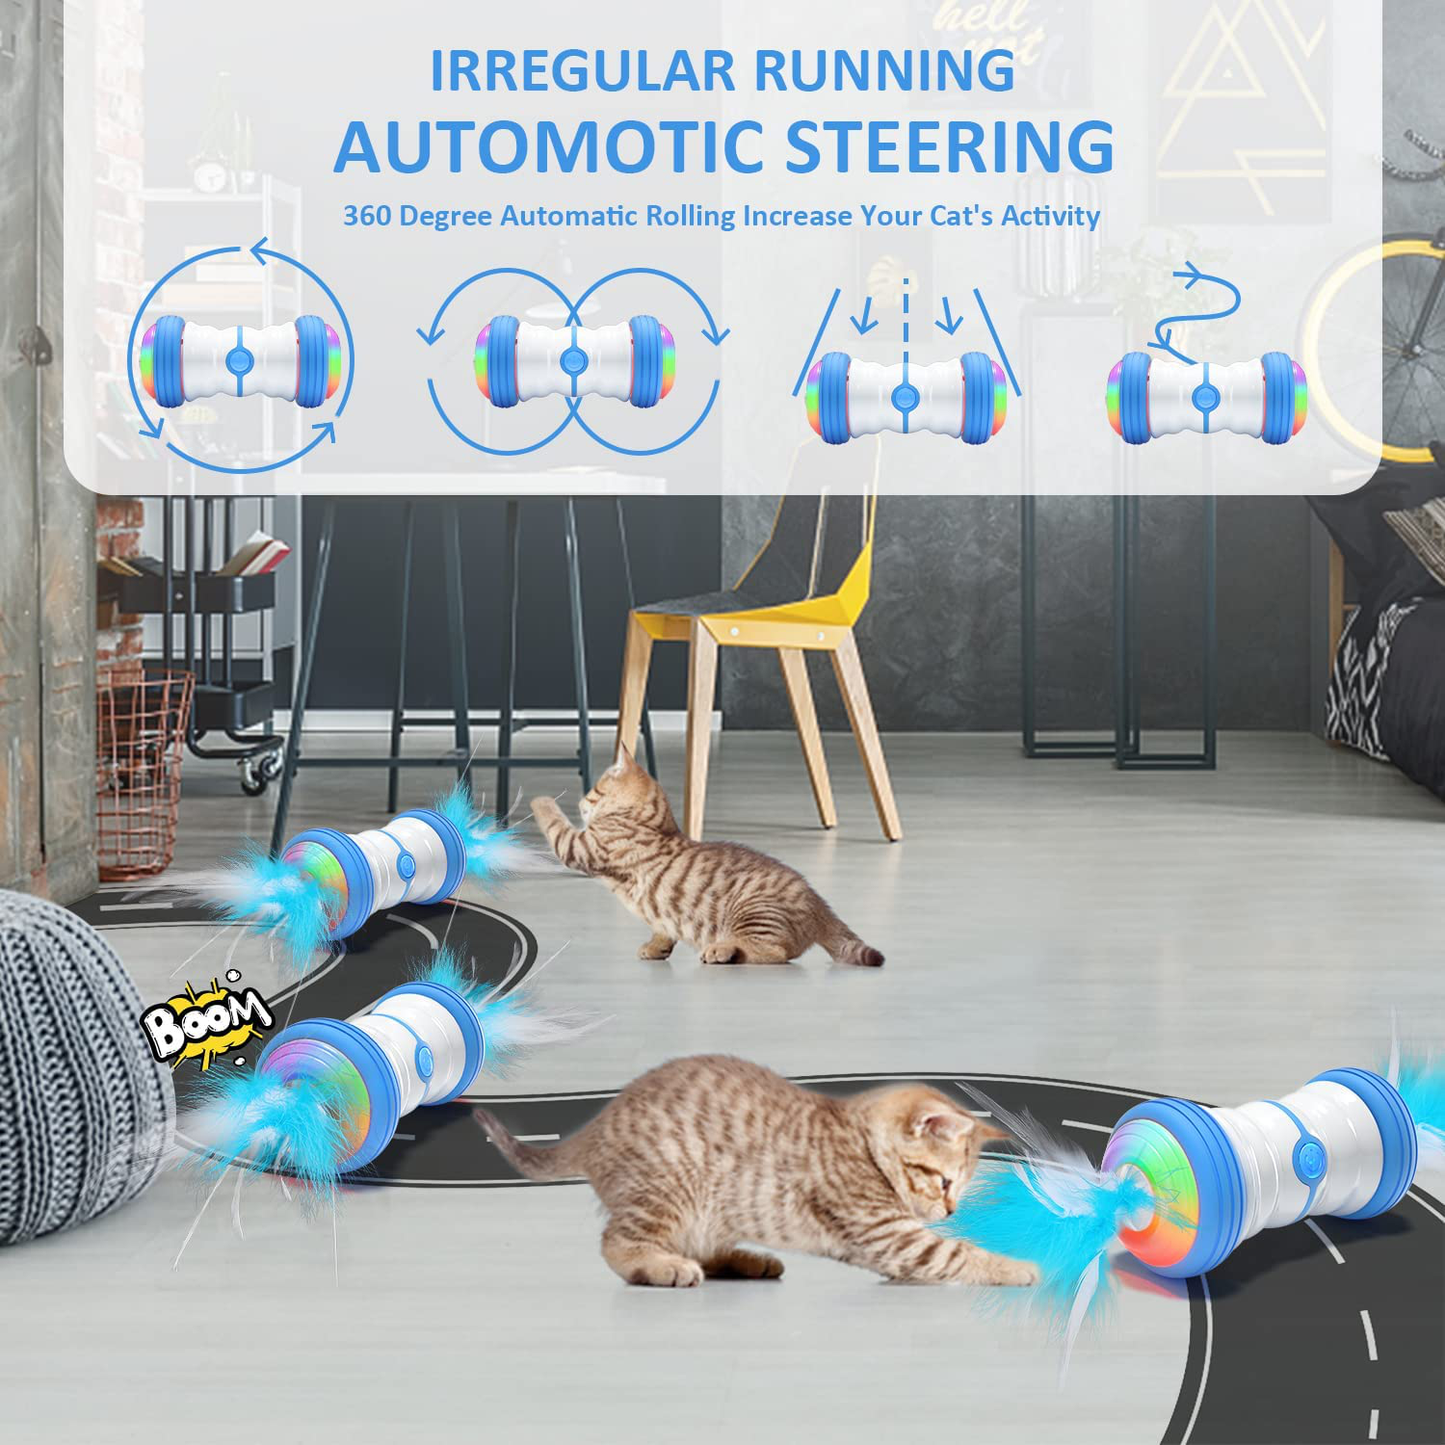 Electric Cat Toy - Automatic Cat Toy Feather - Interactive Cat Toy - Robotic Cat Toy with 4 Feathers & Bell, LED Light and 2 Speeds Mode - Cat Toys for Indoor Cats / Kitten Fun, Exercise Training Animals & Pet Supplies > Pet Supplies > Cat Supplies > Cat Toys Keniglio   